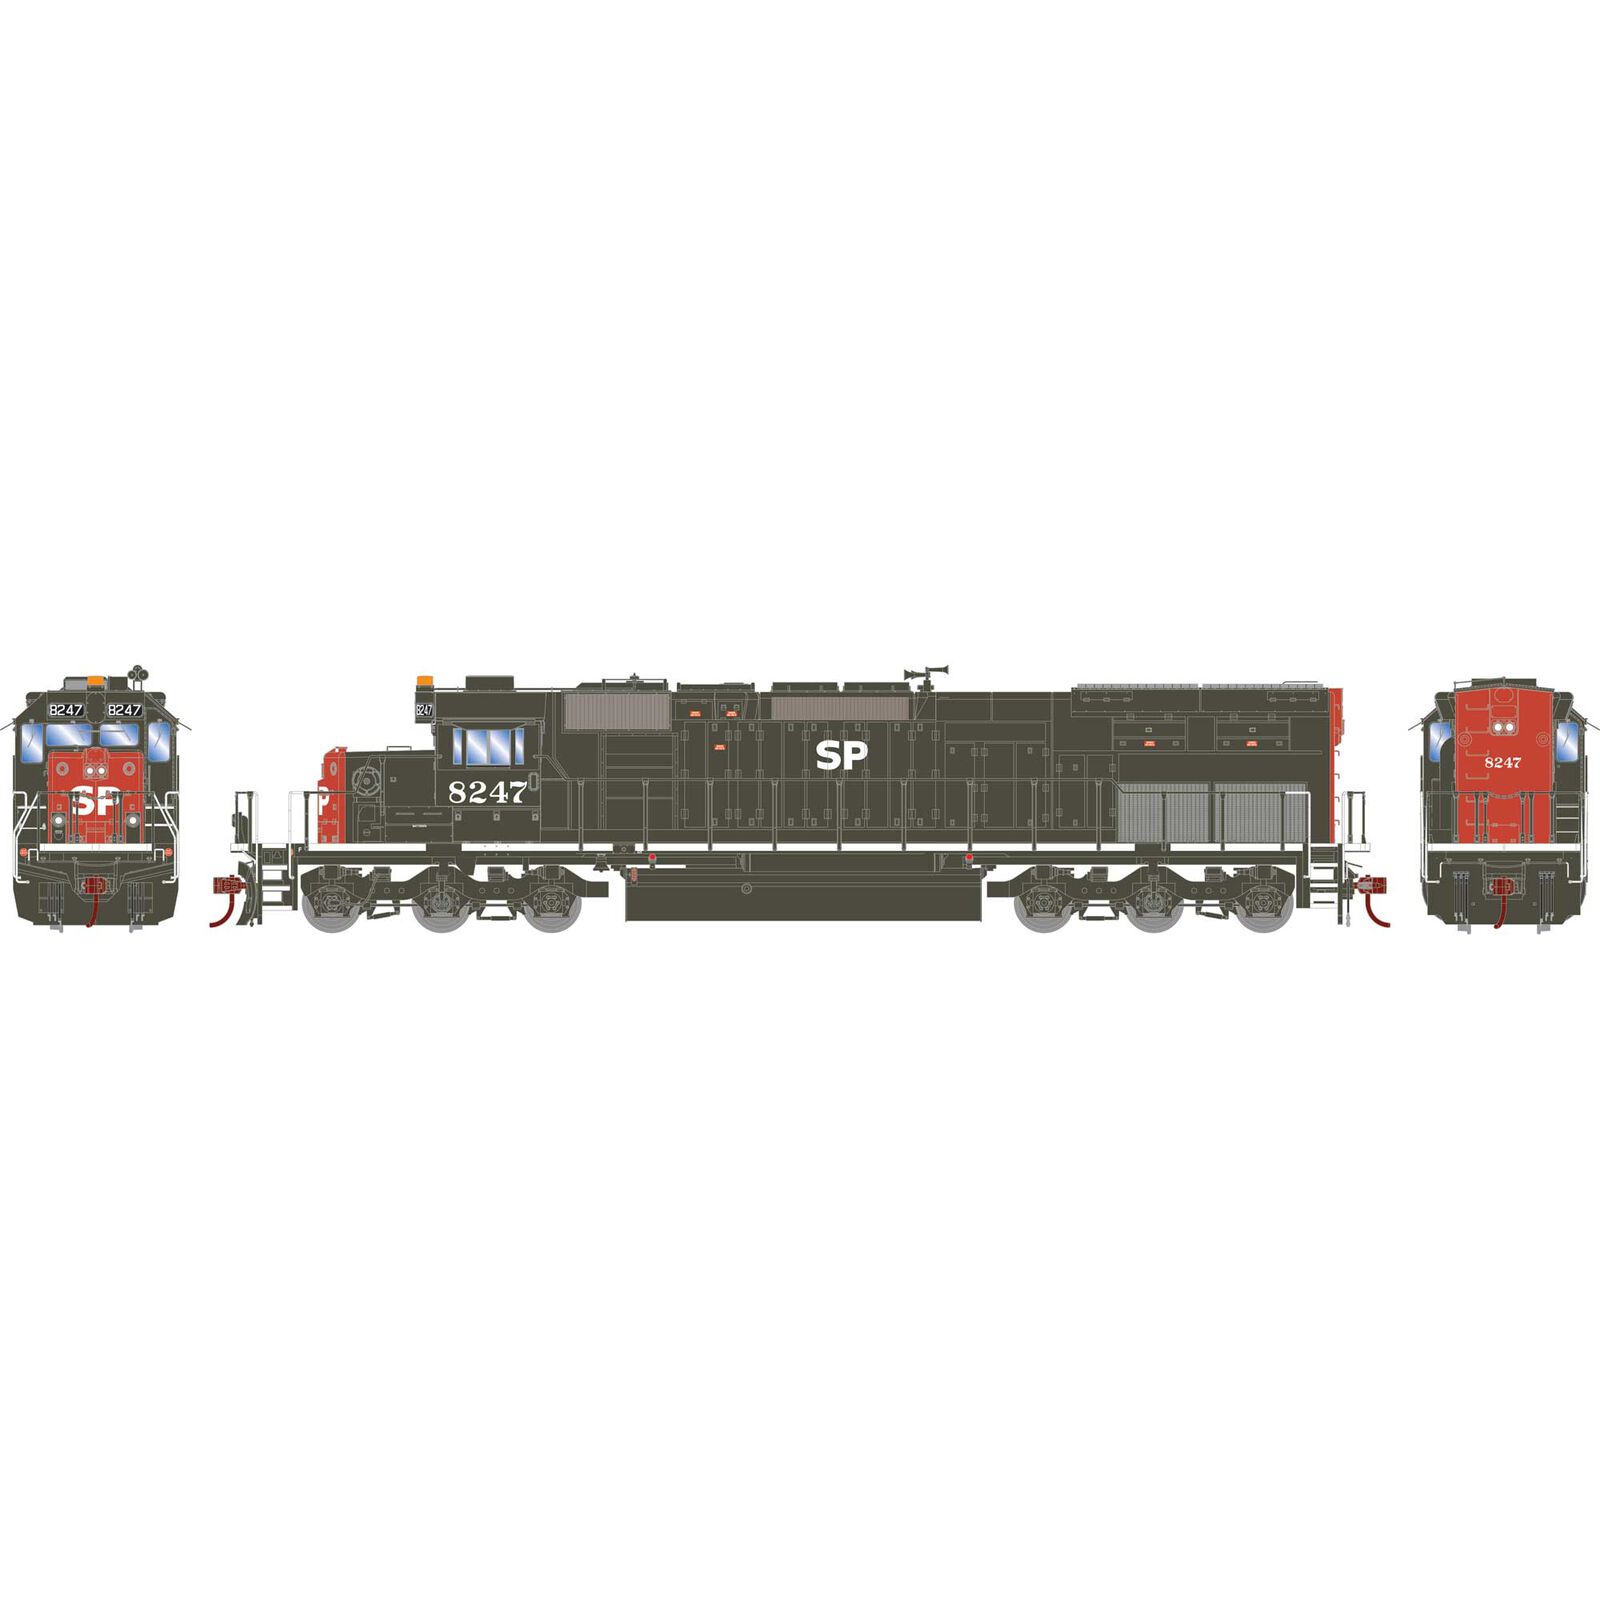 HO RTR SD40T-2 with DCC & Sound, SP/Roseville #8247